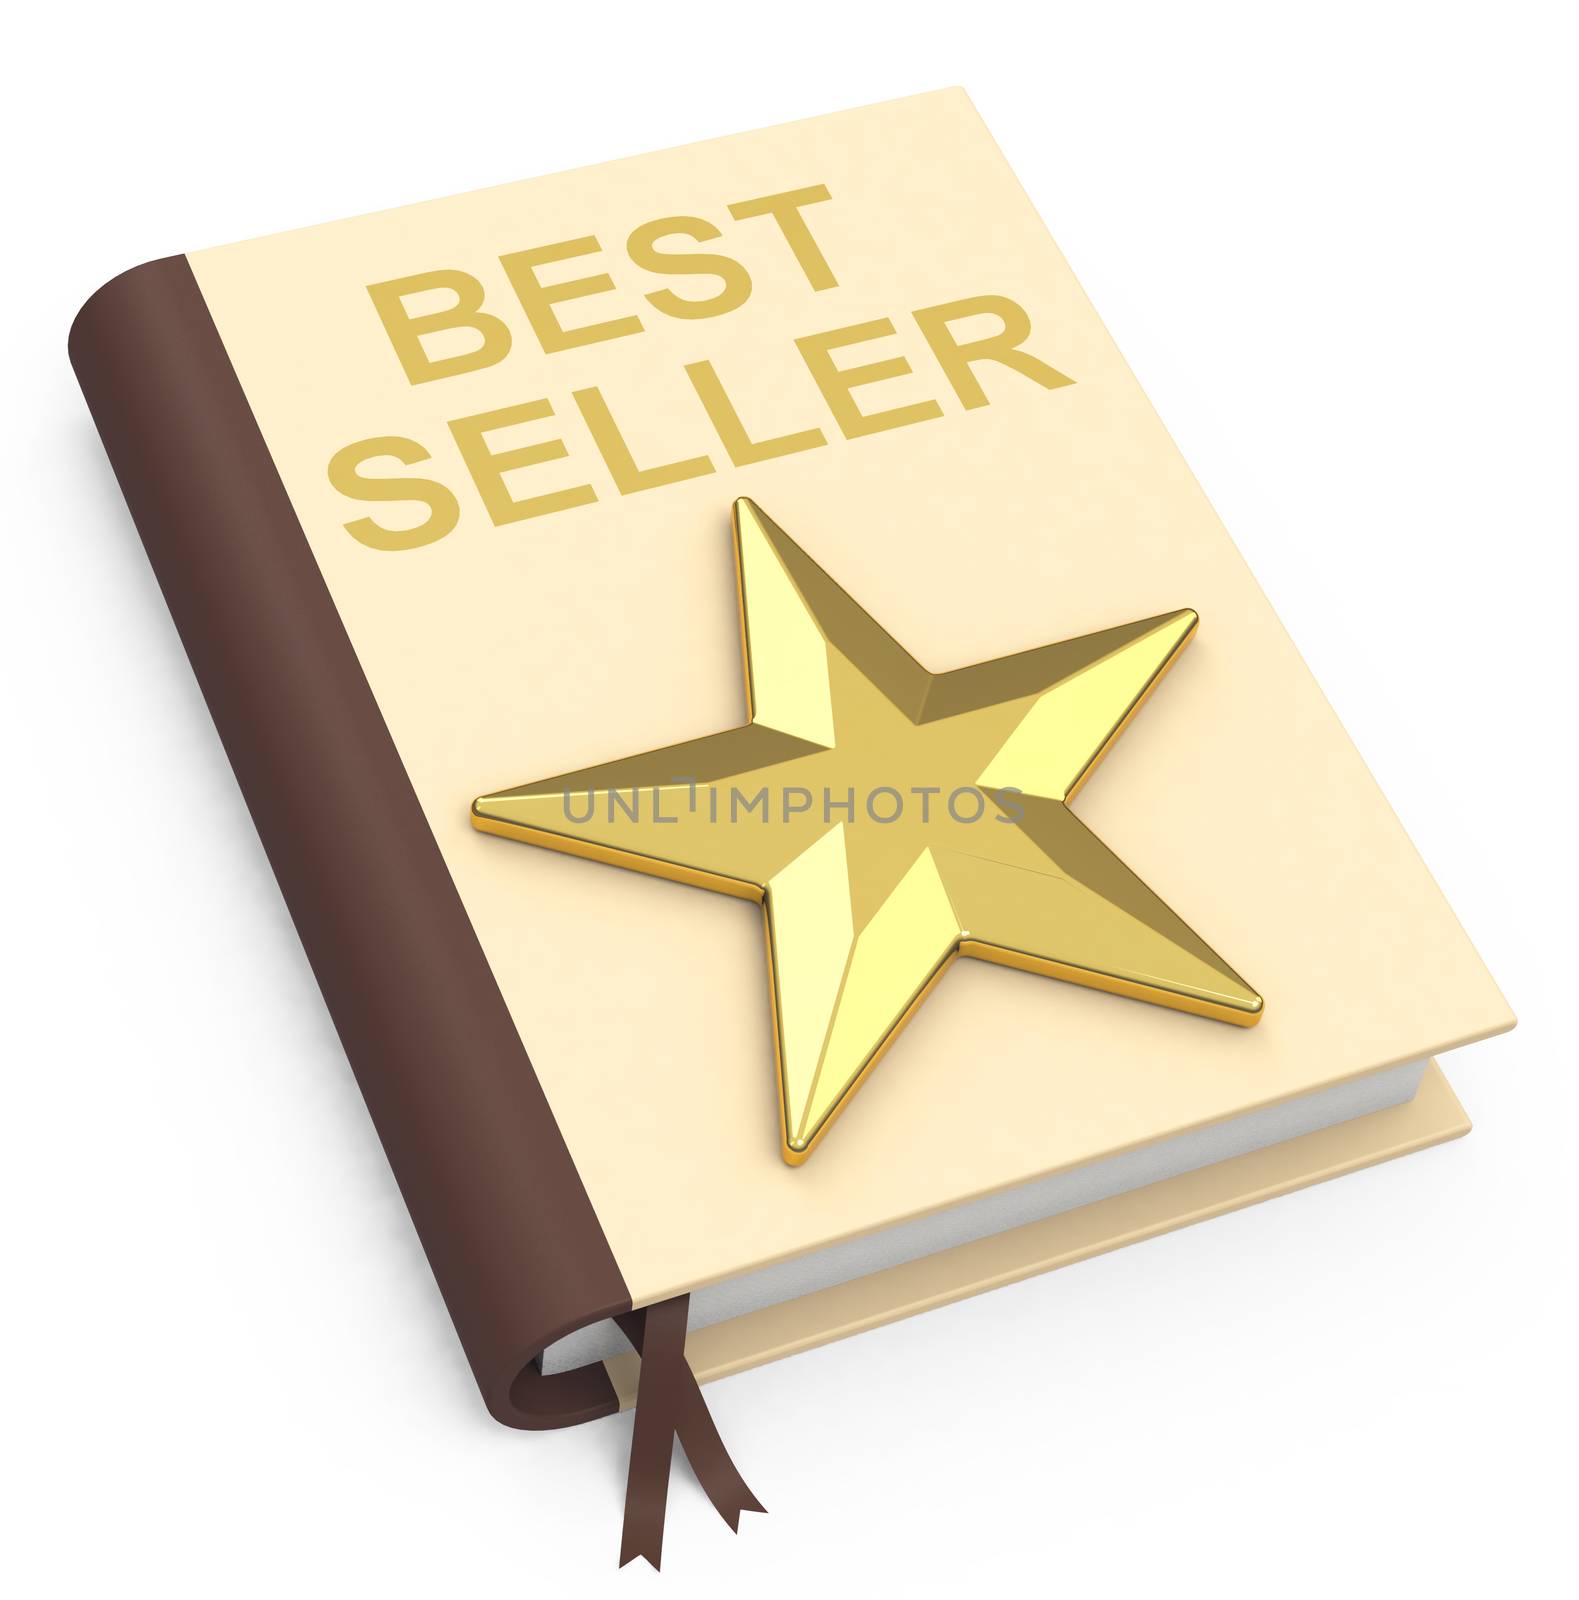 3d generated picture of a bestseller book